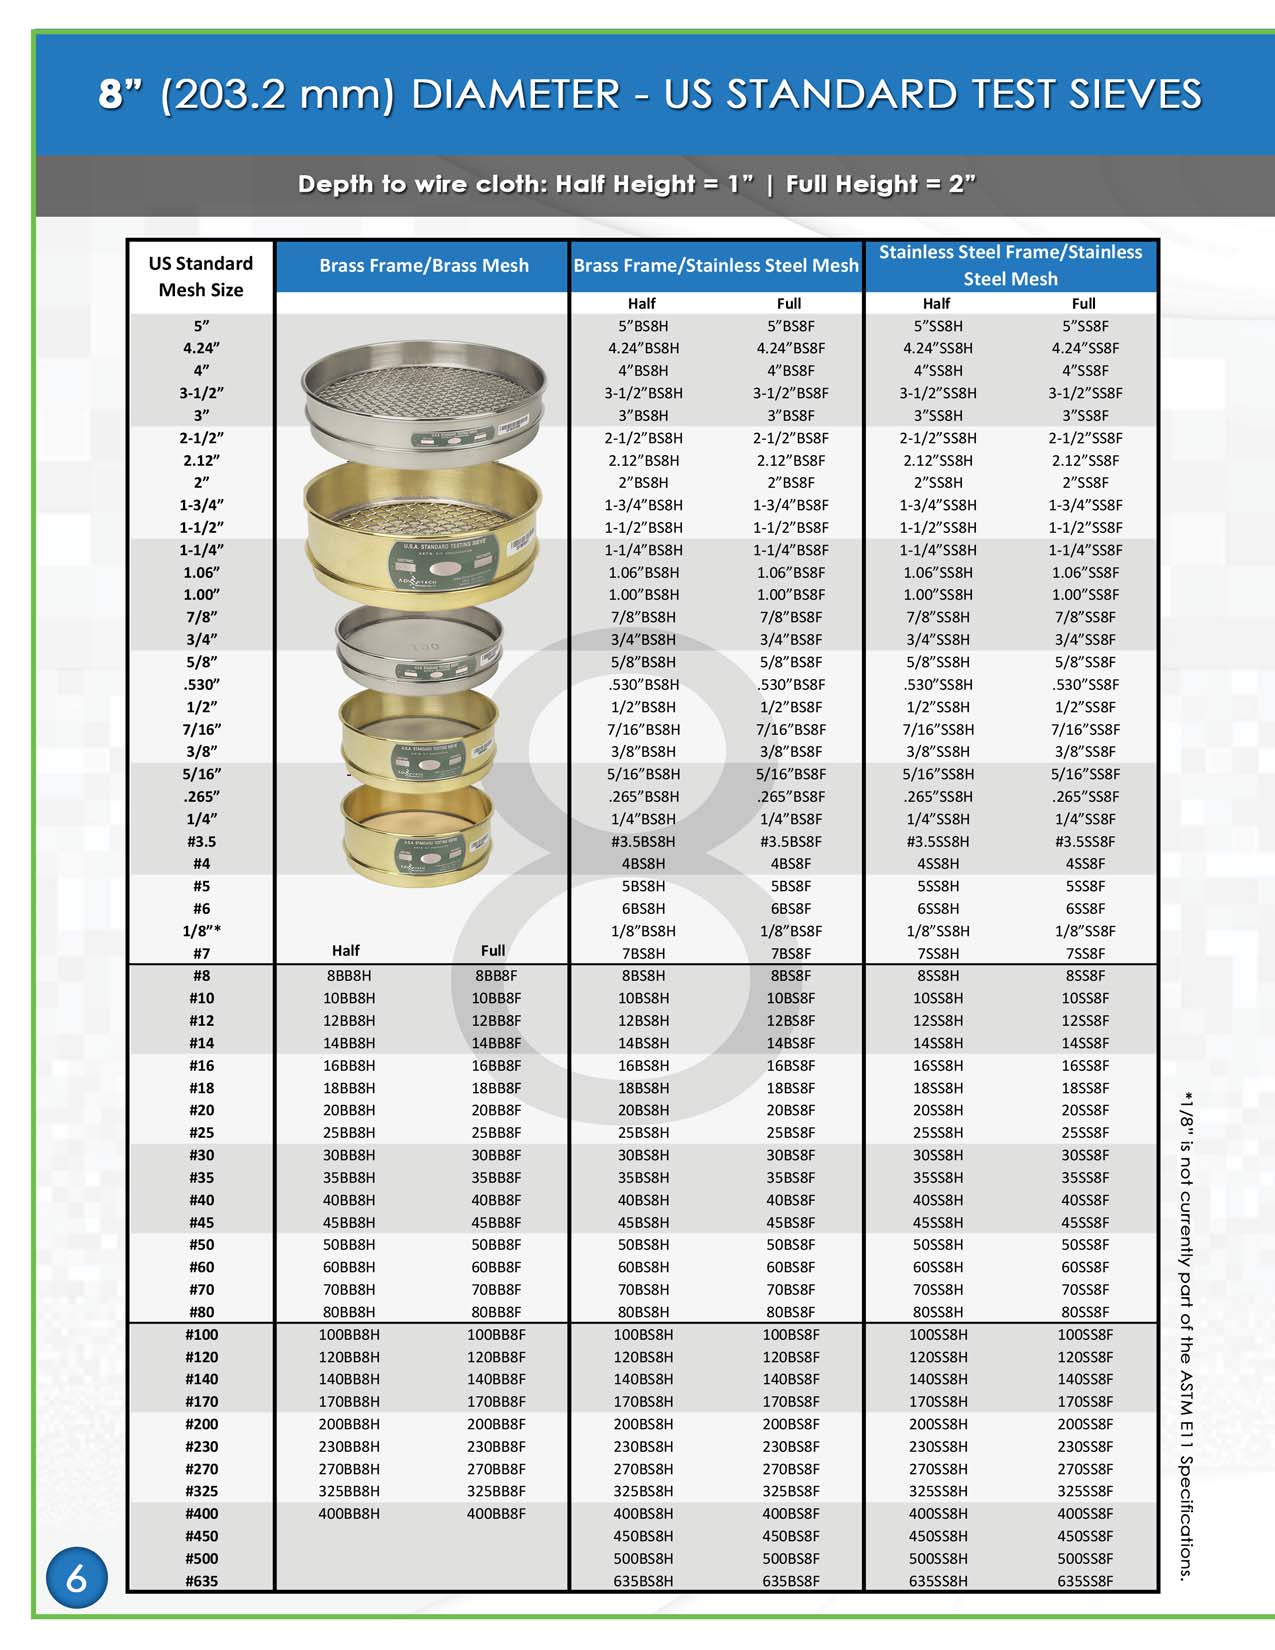 advantech-sieves-and-shakers-catalog-2020-page-08.jpg